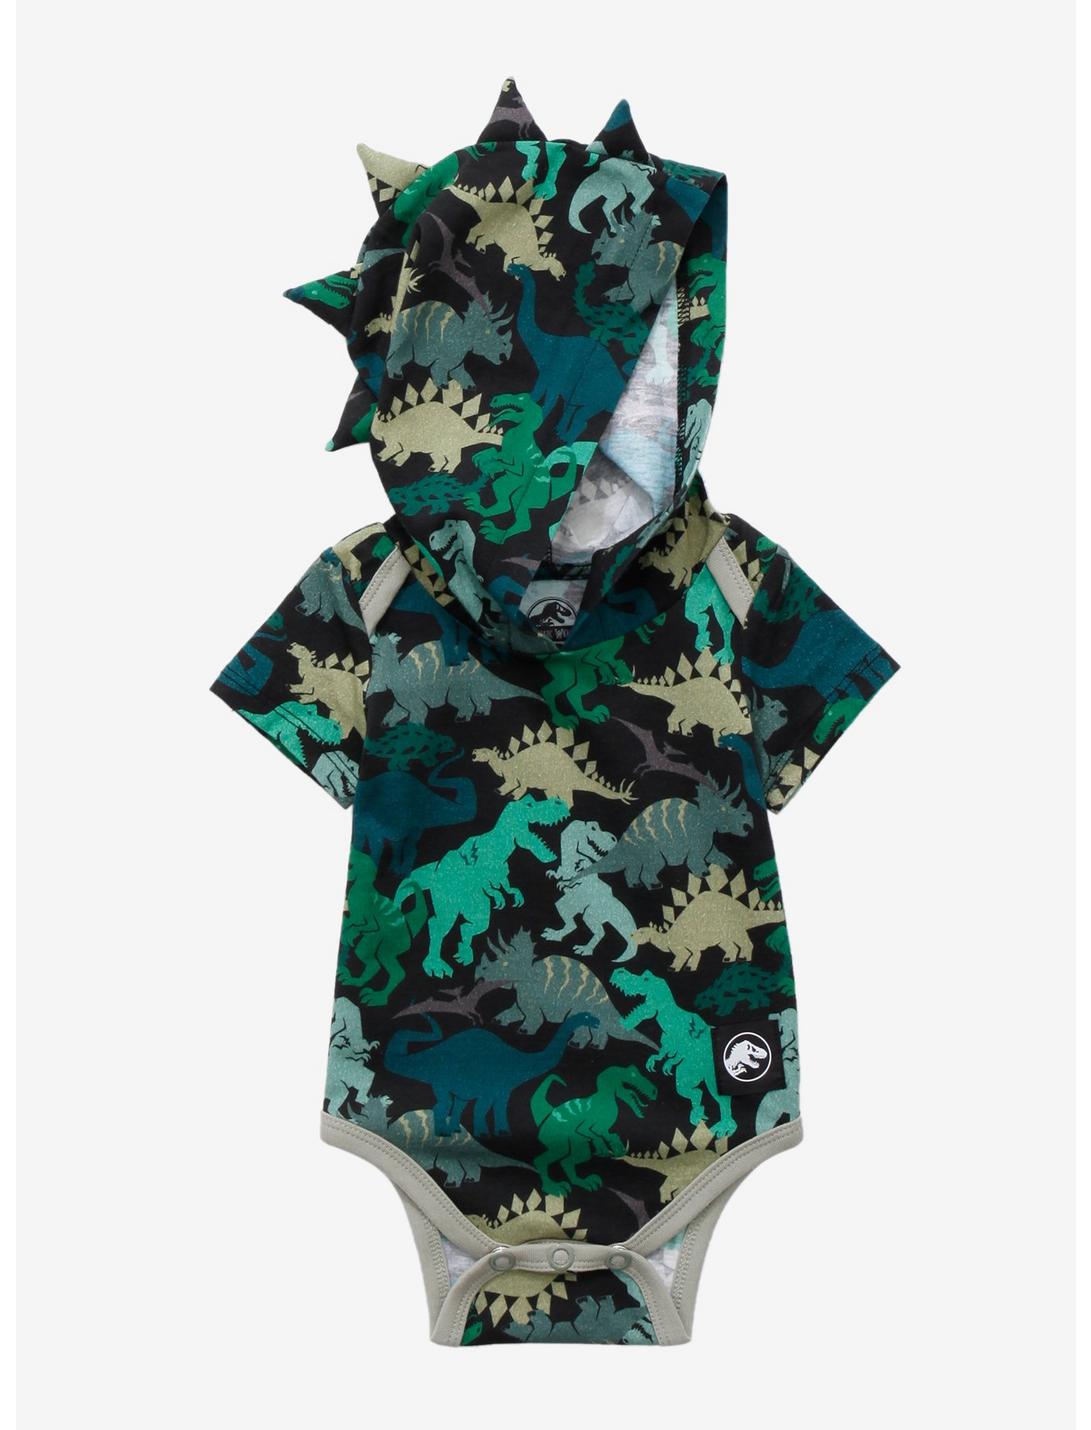 Jurassic Park Dinosaur Allover Print Infant One-Piece - BoxLunch Exclusive, CAMO, hi-res